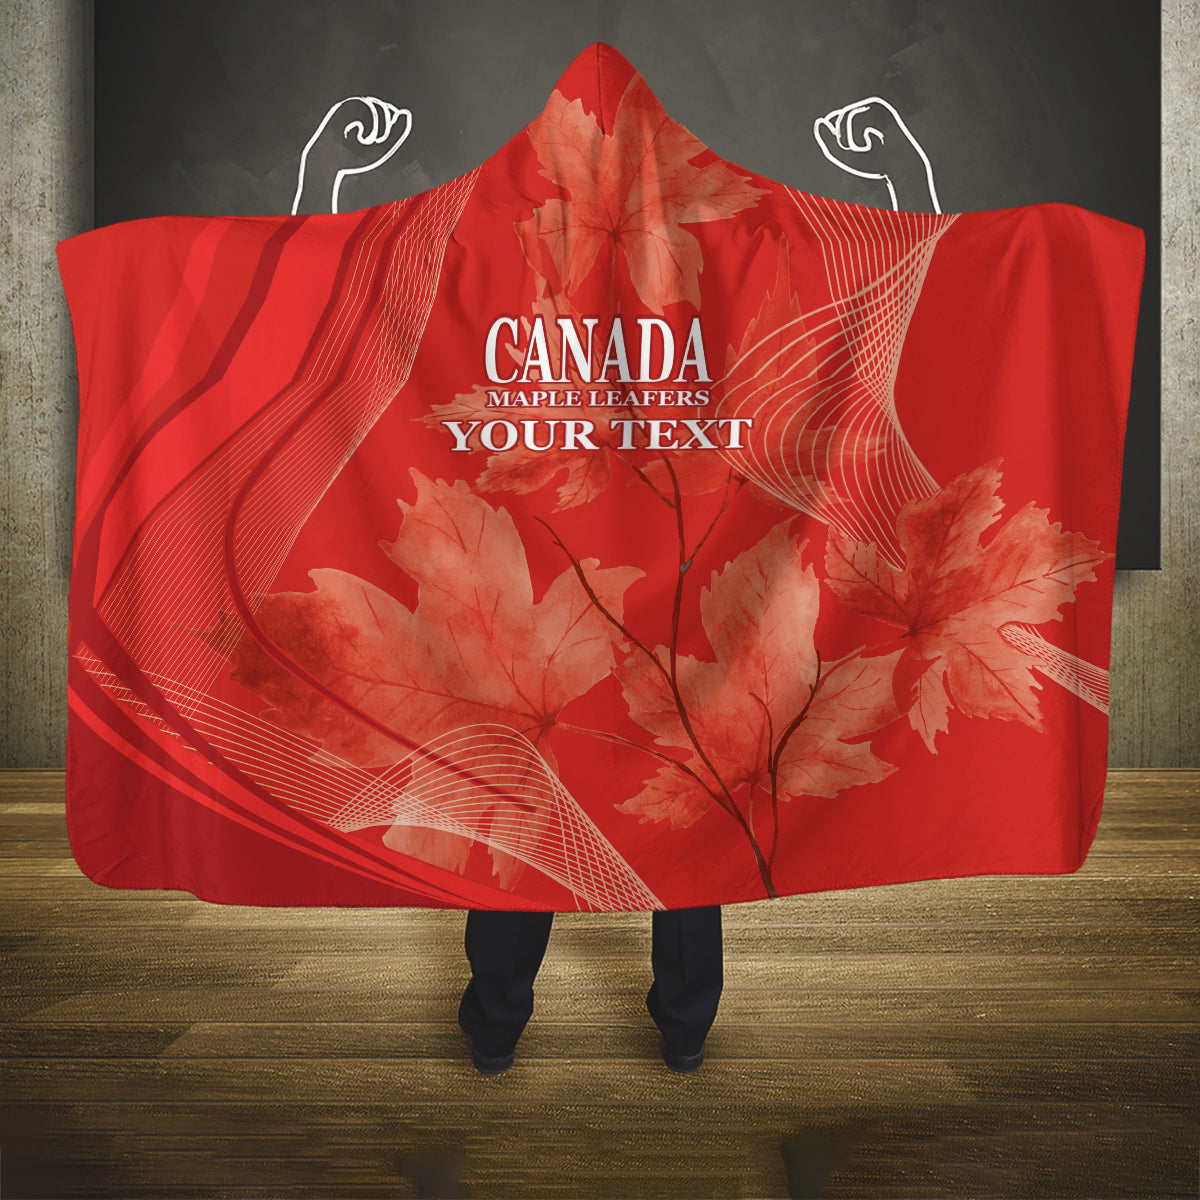 Canada Cricket World Cup 2024 Hooded Blanket Maple Leafers Make Champions